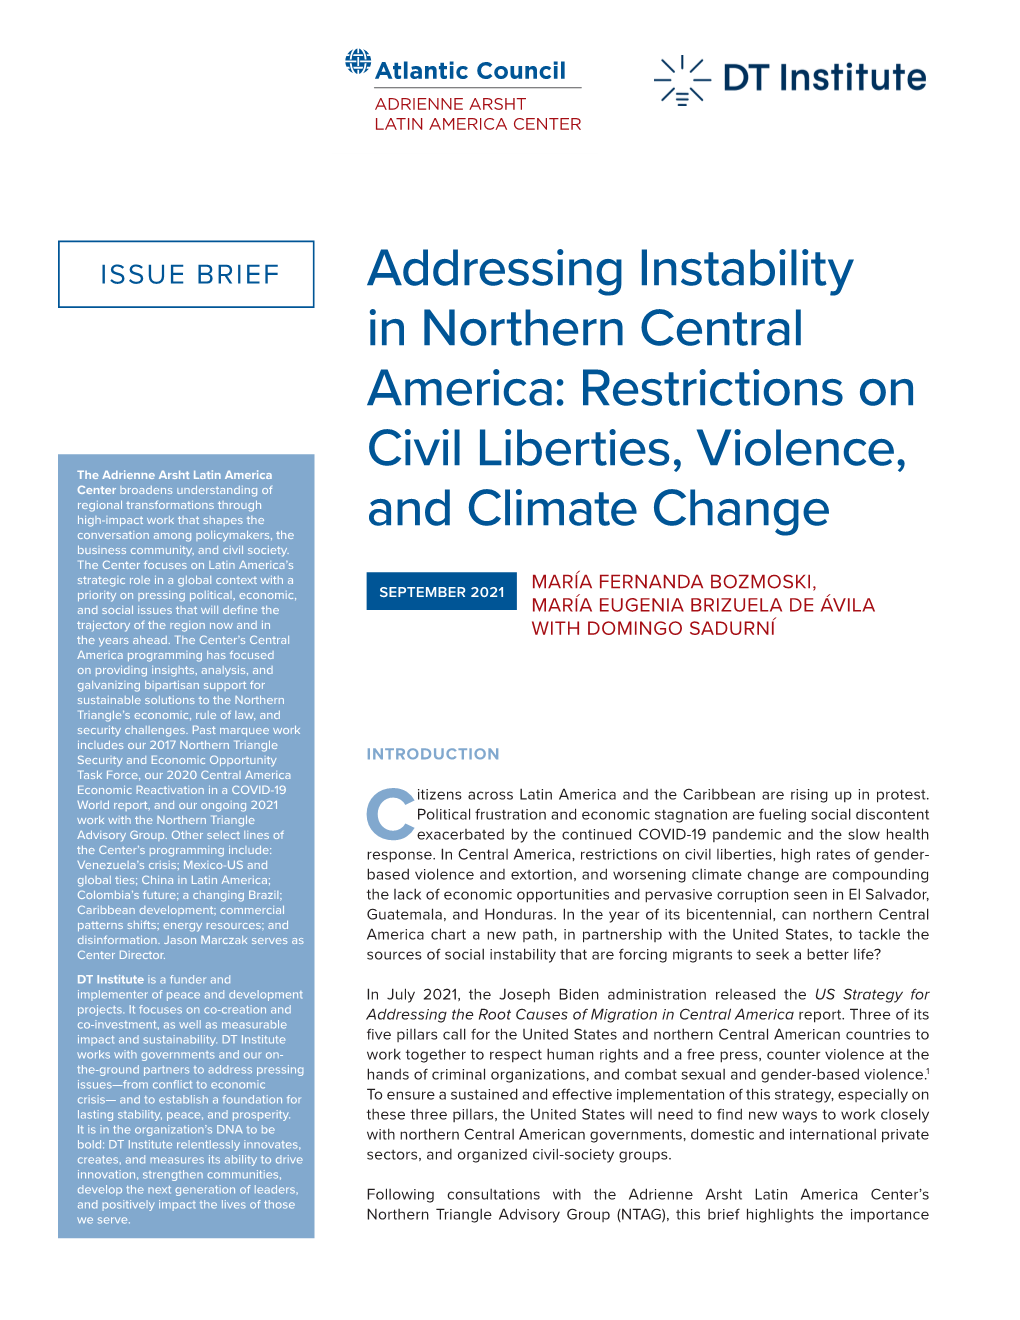 Addressing Instability in Northern Central America: Restrictions On